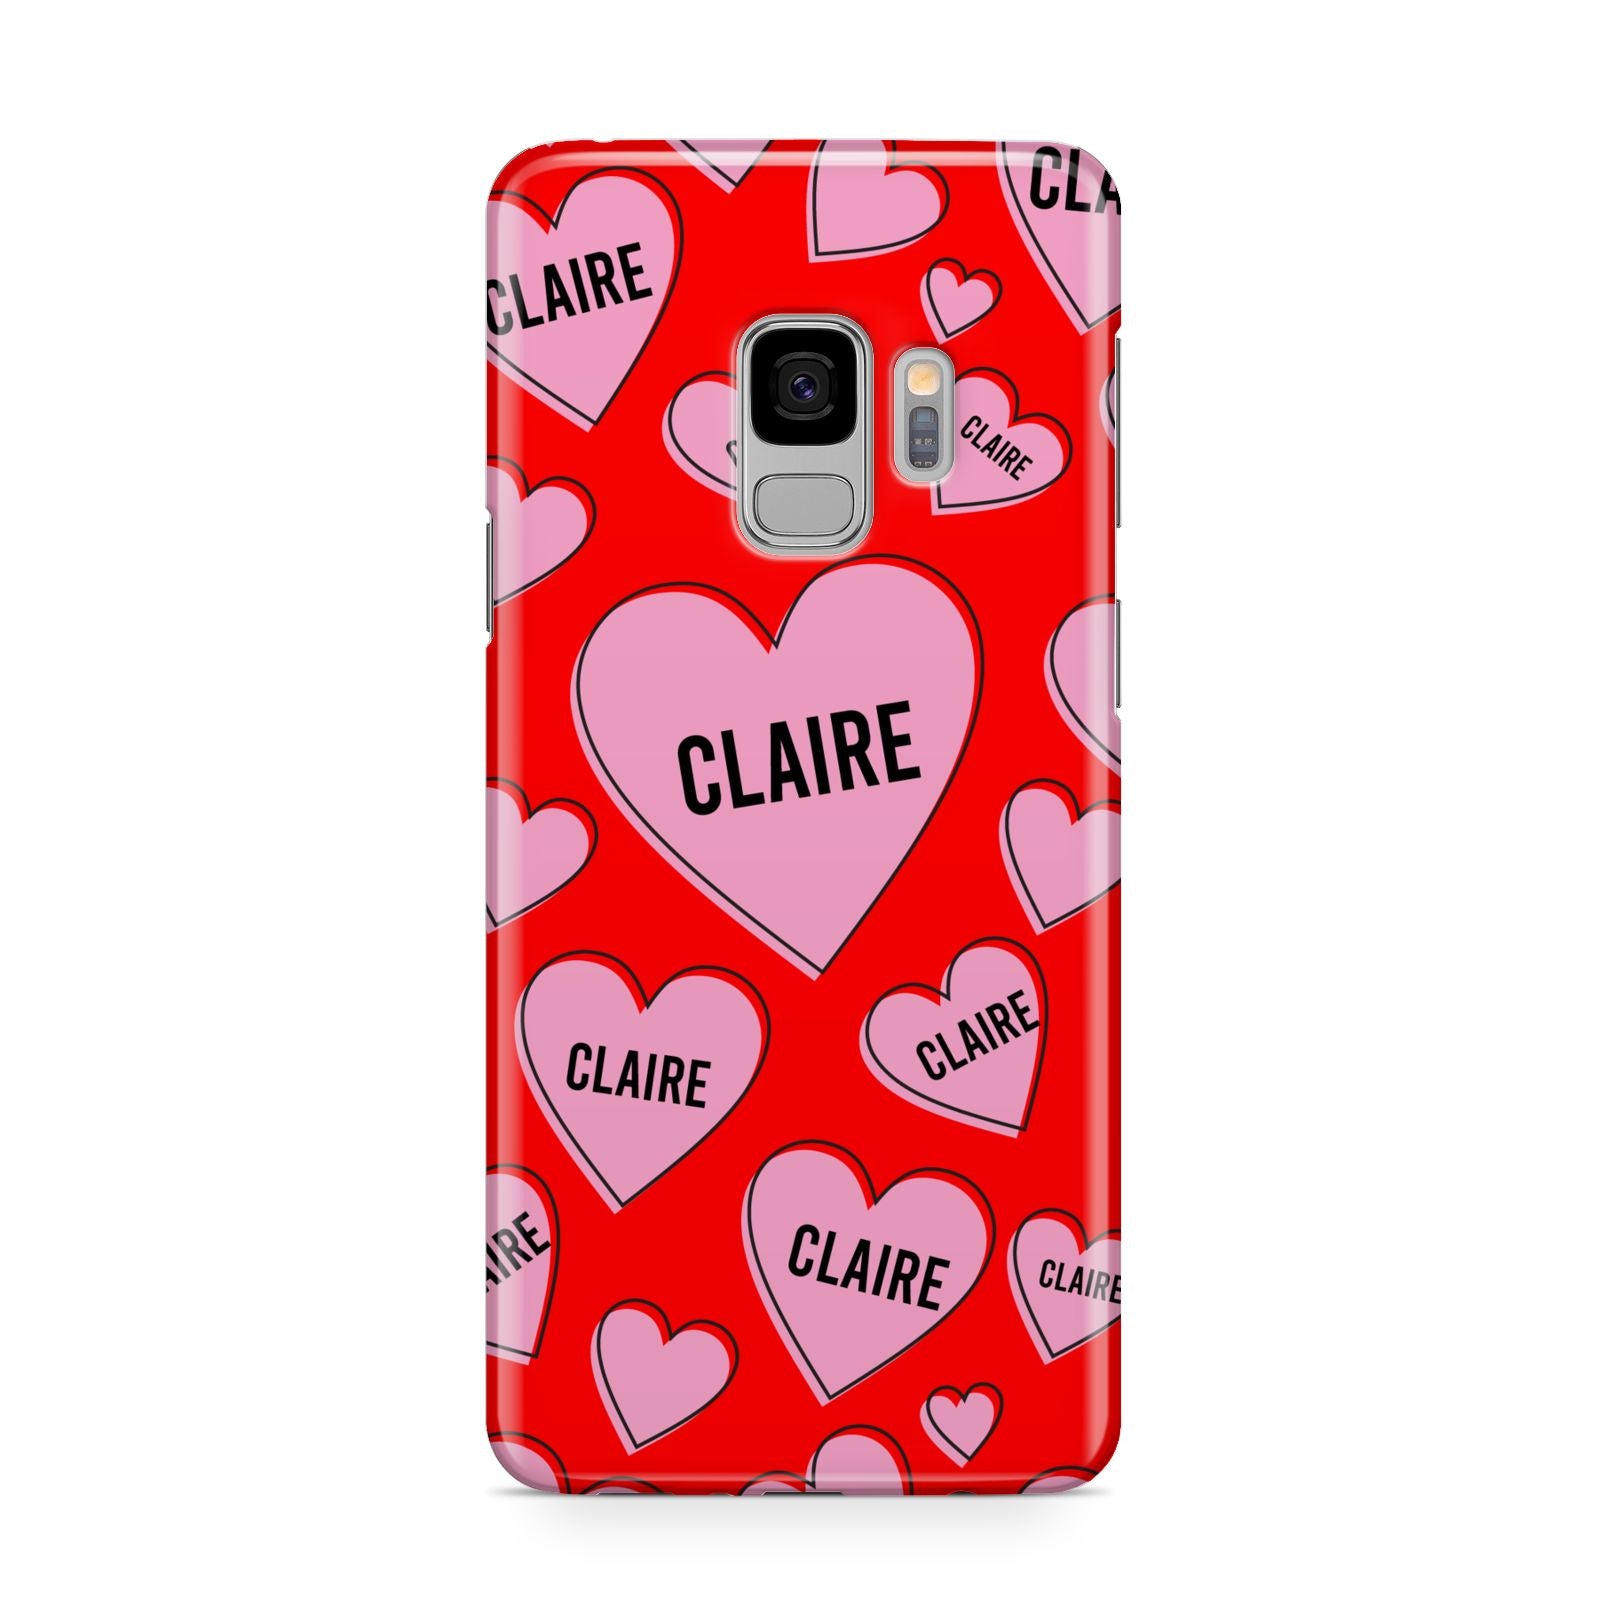 Personalised Hearts Samsung Galaxy S9 Case